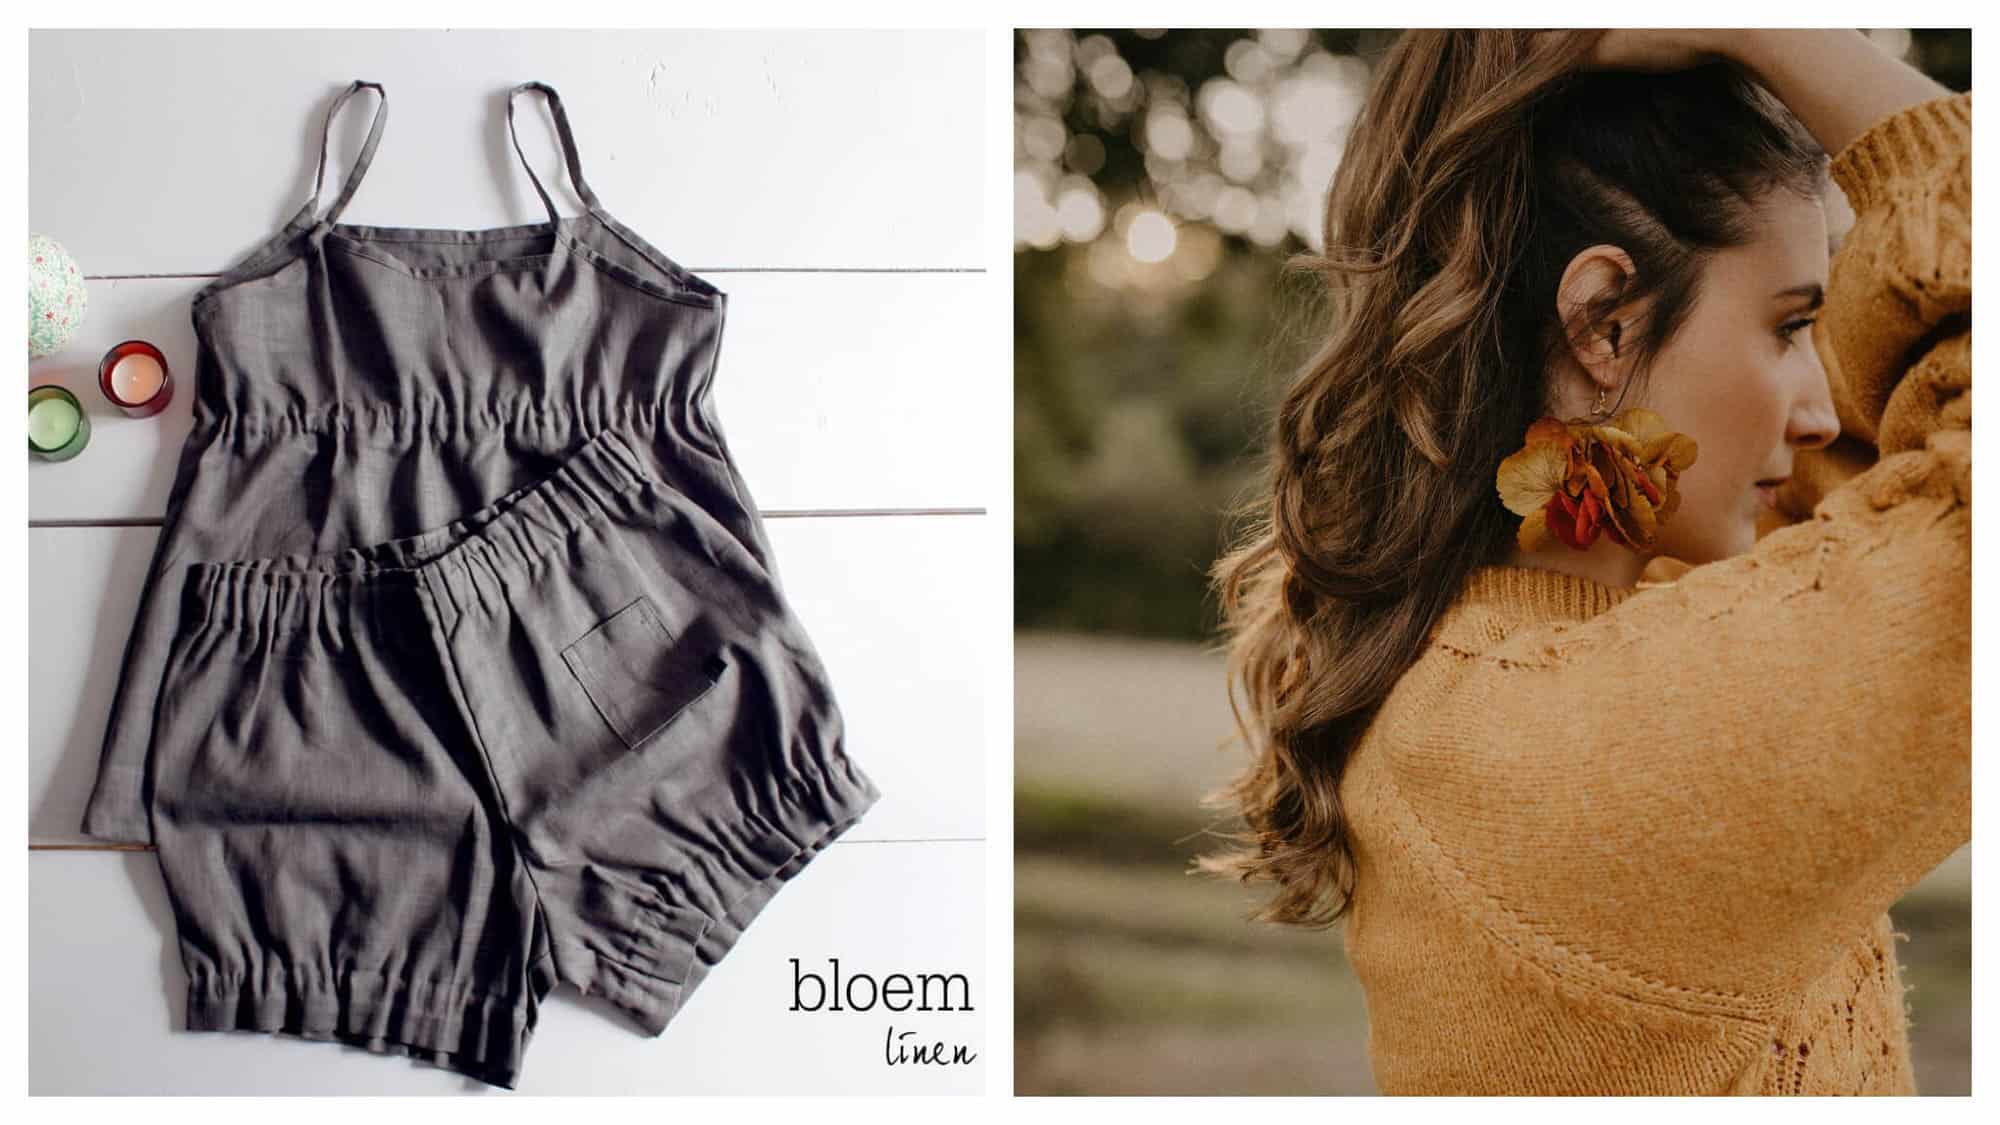 Left: A dark grey camisole and pair of bloomers are laid out flat on a white surface. The logo ‘bloem linen’ is visible in the bottom right corner. Right: A woman stands in nature, with her hands running through her hair. She is wearing a light orange sweater, and large statement earrings consisting of orange and brown flowers.